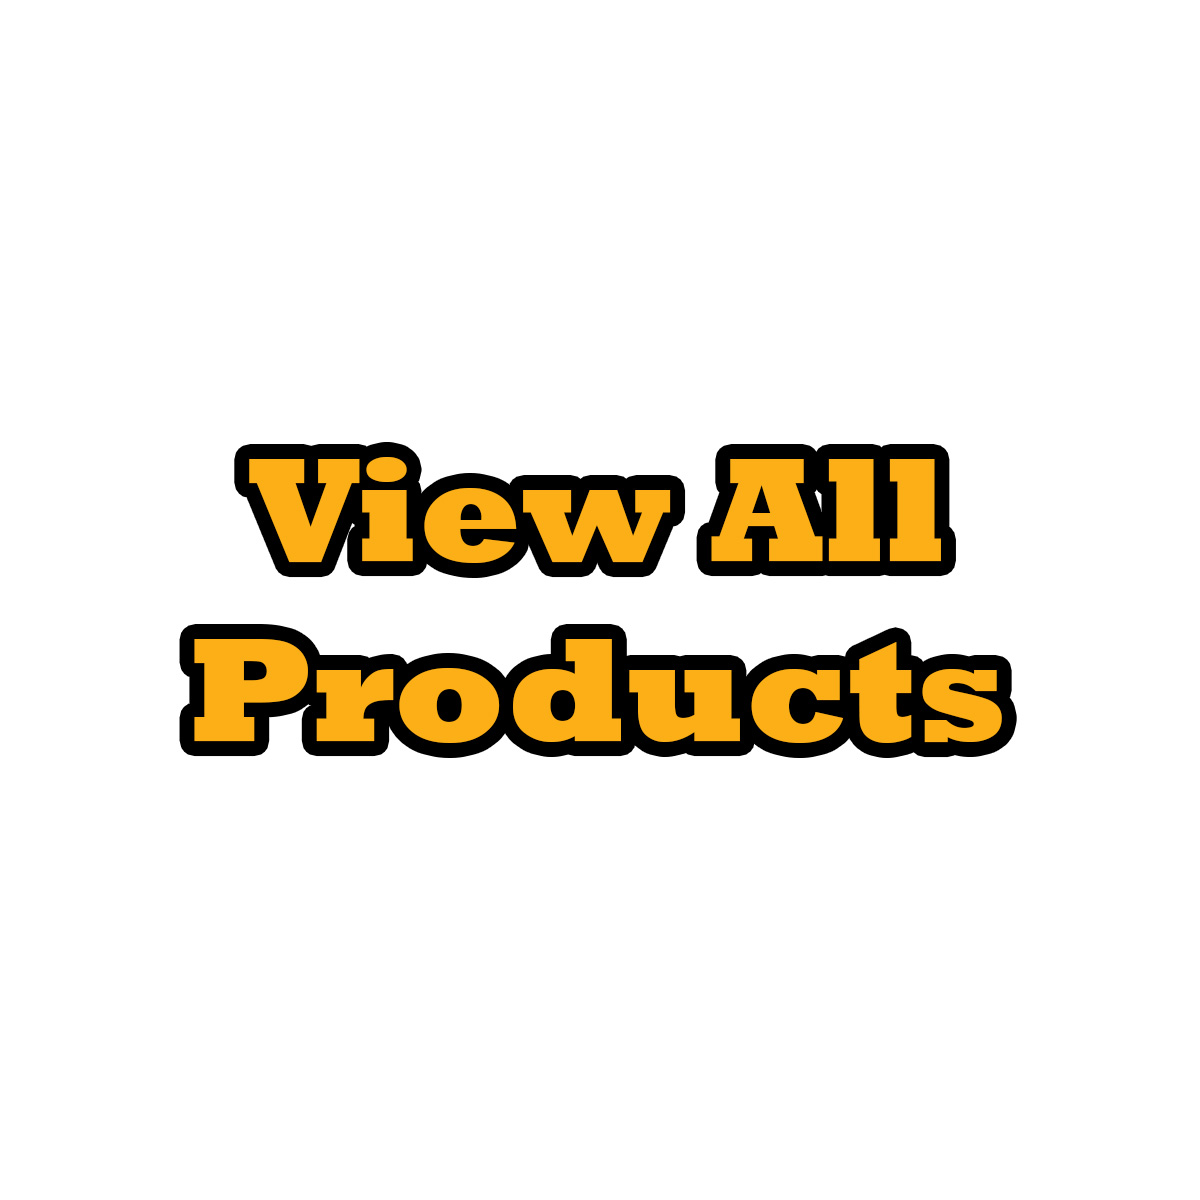 View all products